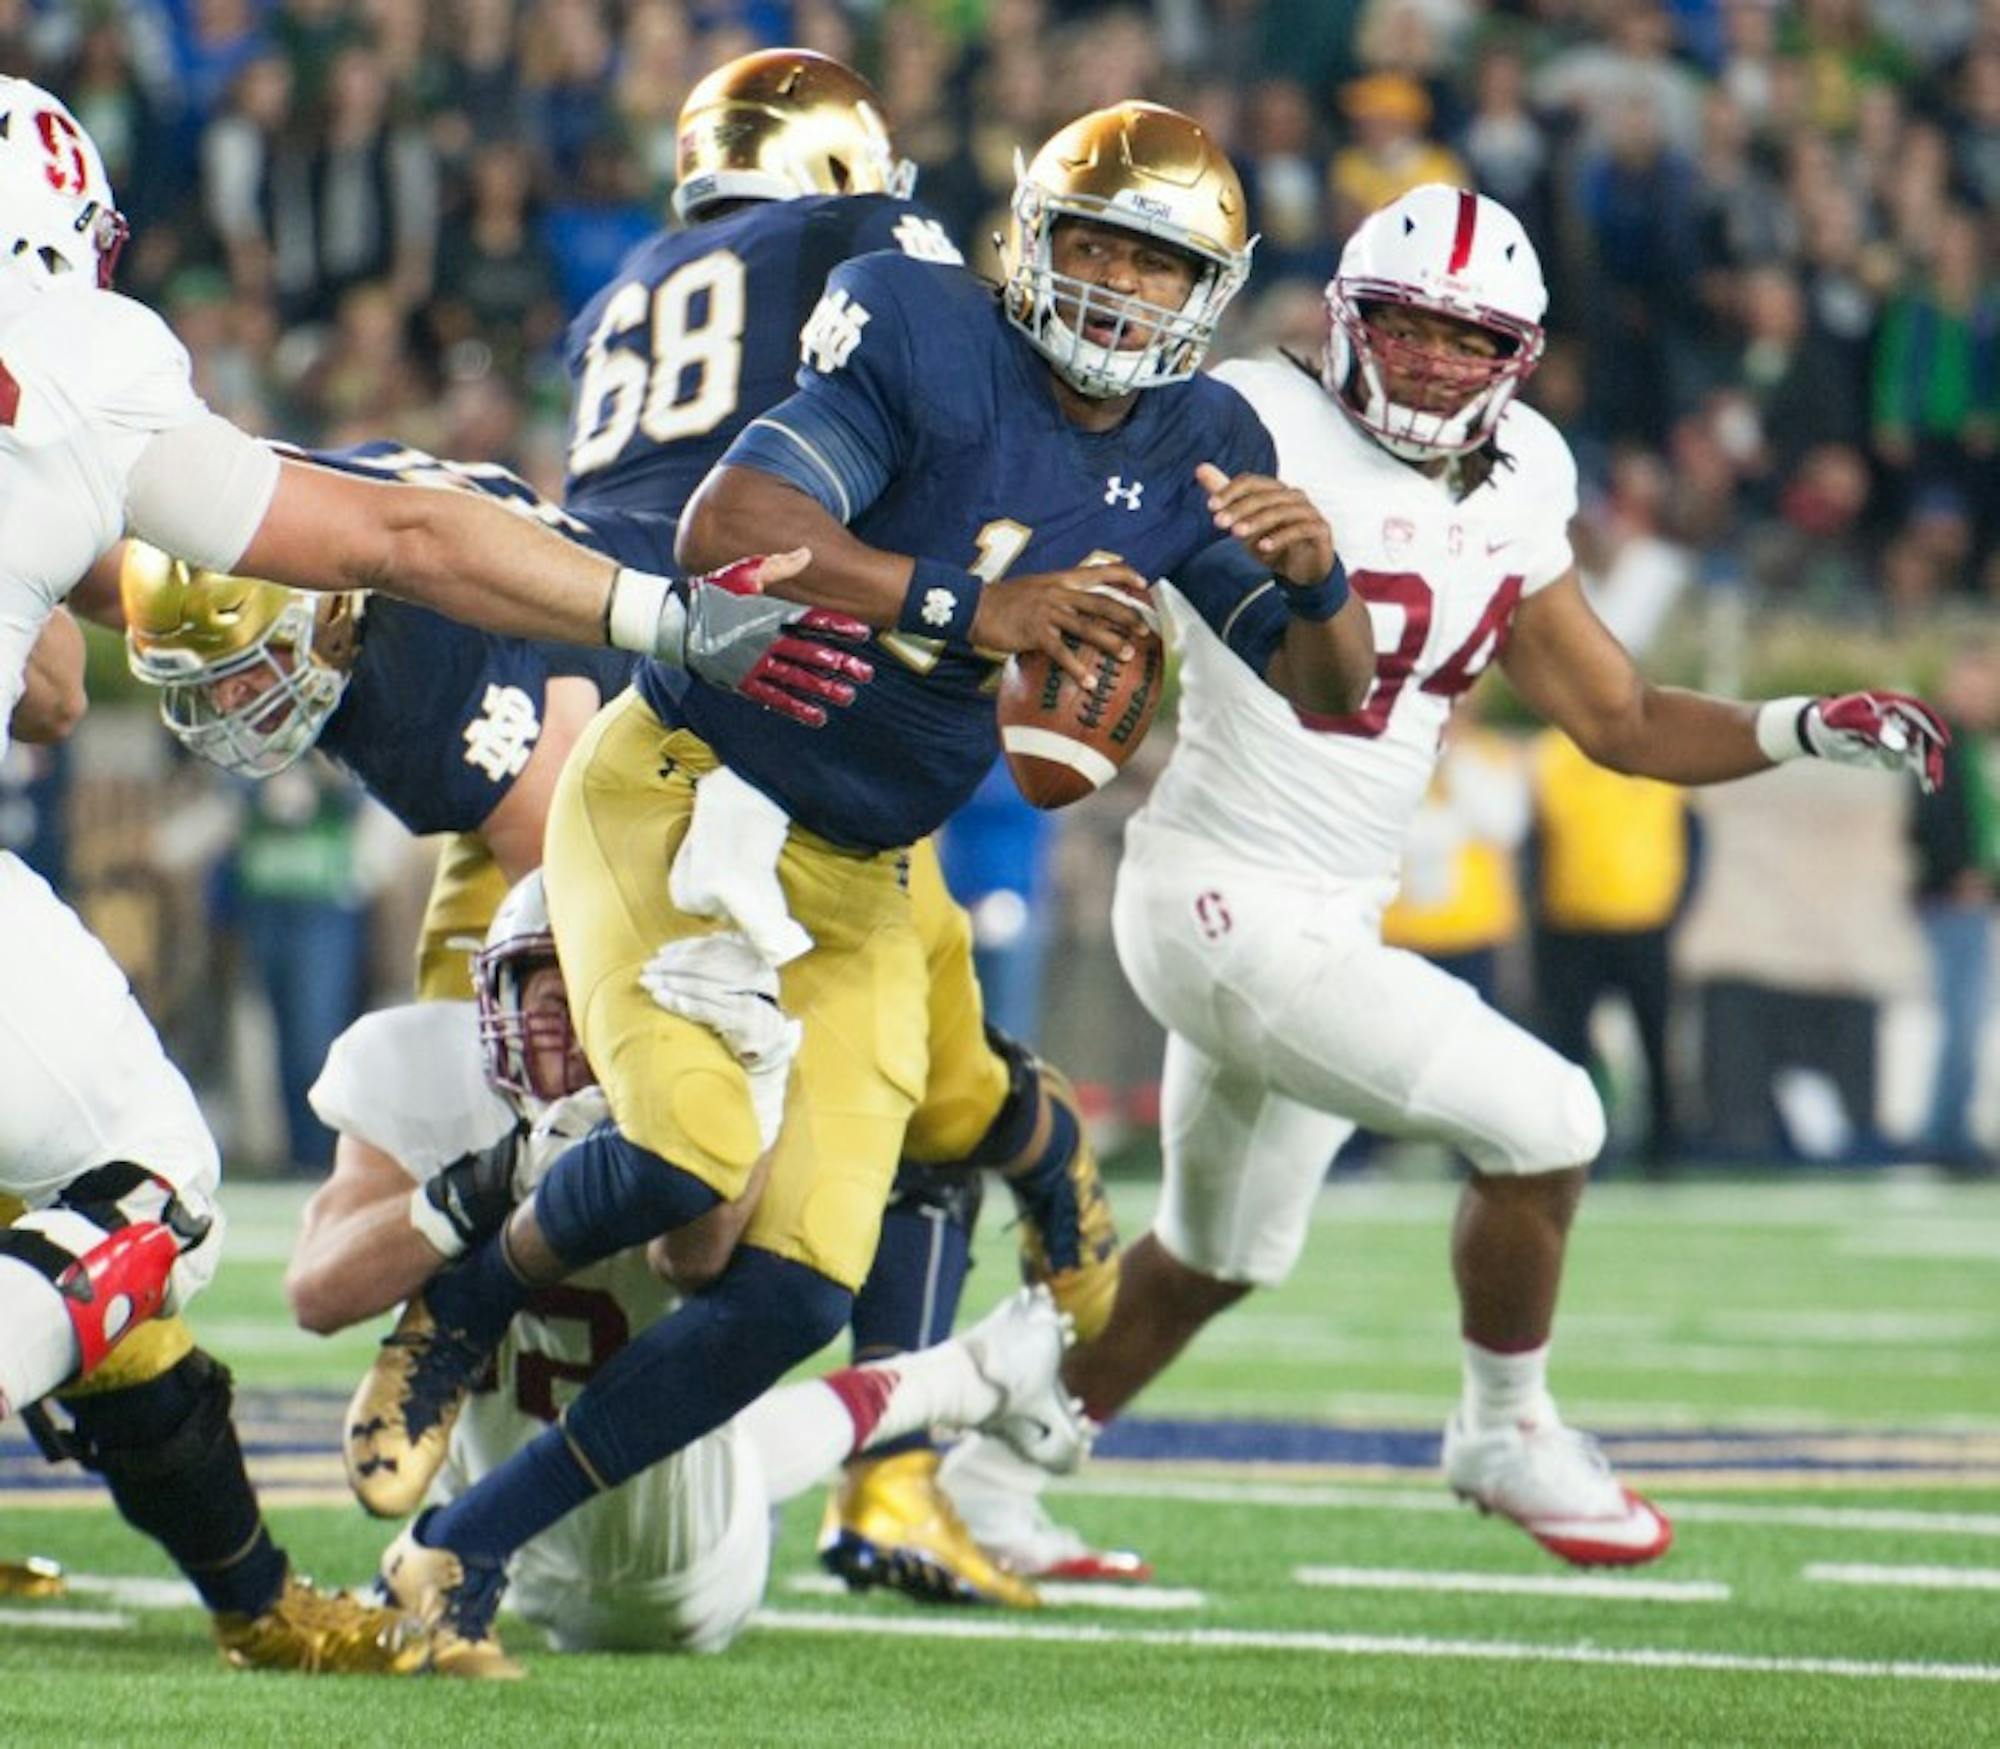 Irish junior quarterback DeShone Kizer scrambles through traffic while keeping his eyes downfield during Notre Dame’s 17-10 loss to Stanford on Oct. 15 at Notre Dame Stadium.